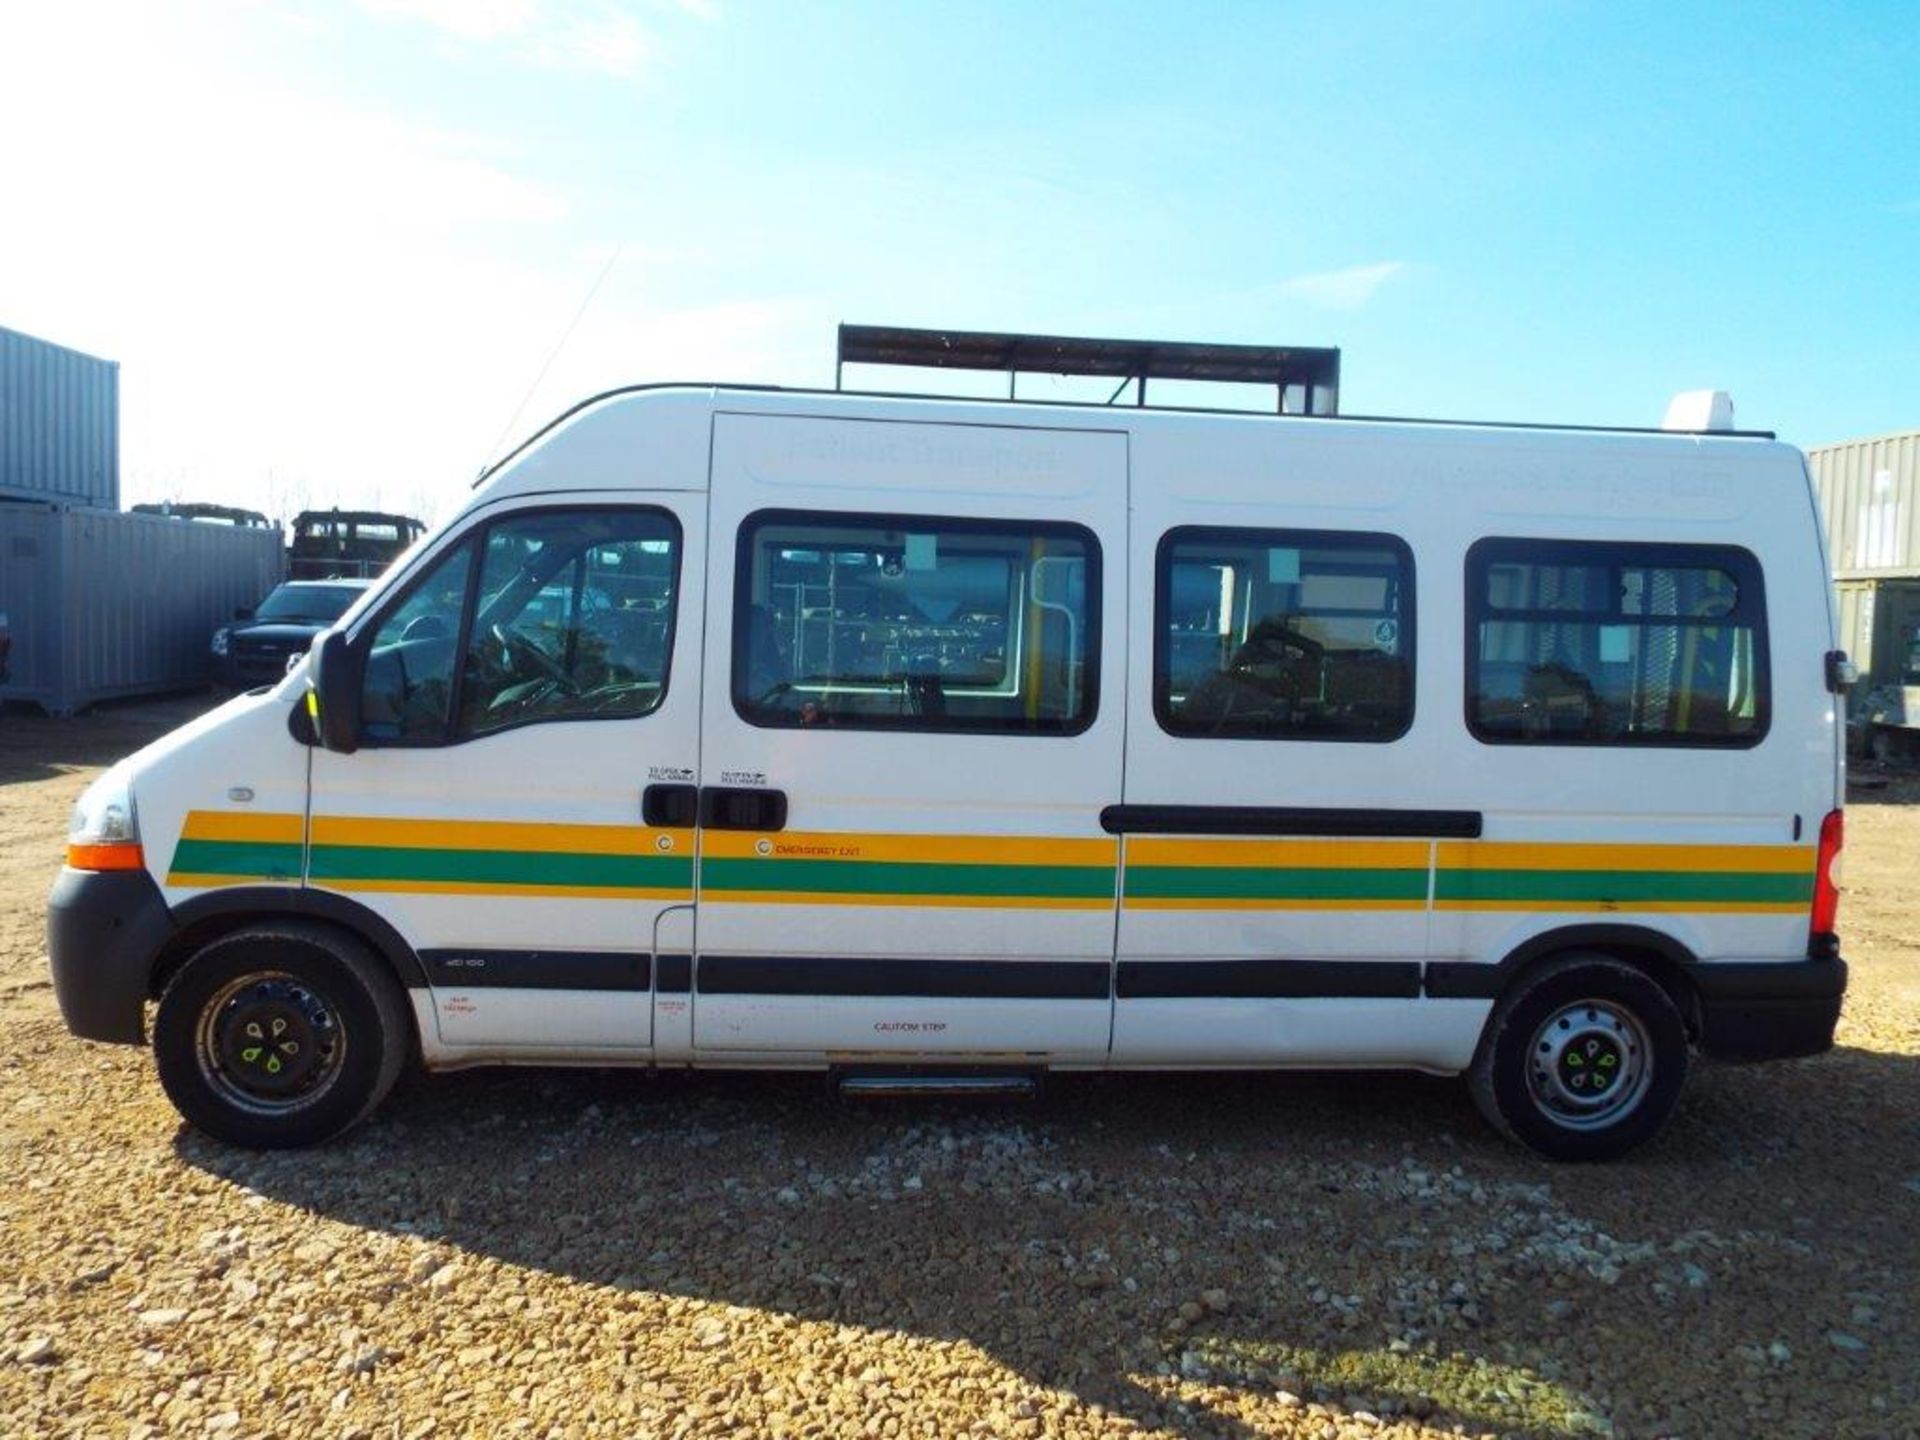 Renault Master 2.5 DCI Patient Transfer Bus with Ricon 350KG Tail Lift - Image 4 of 32